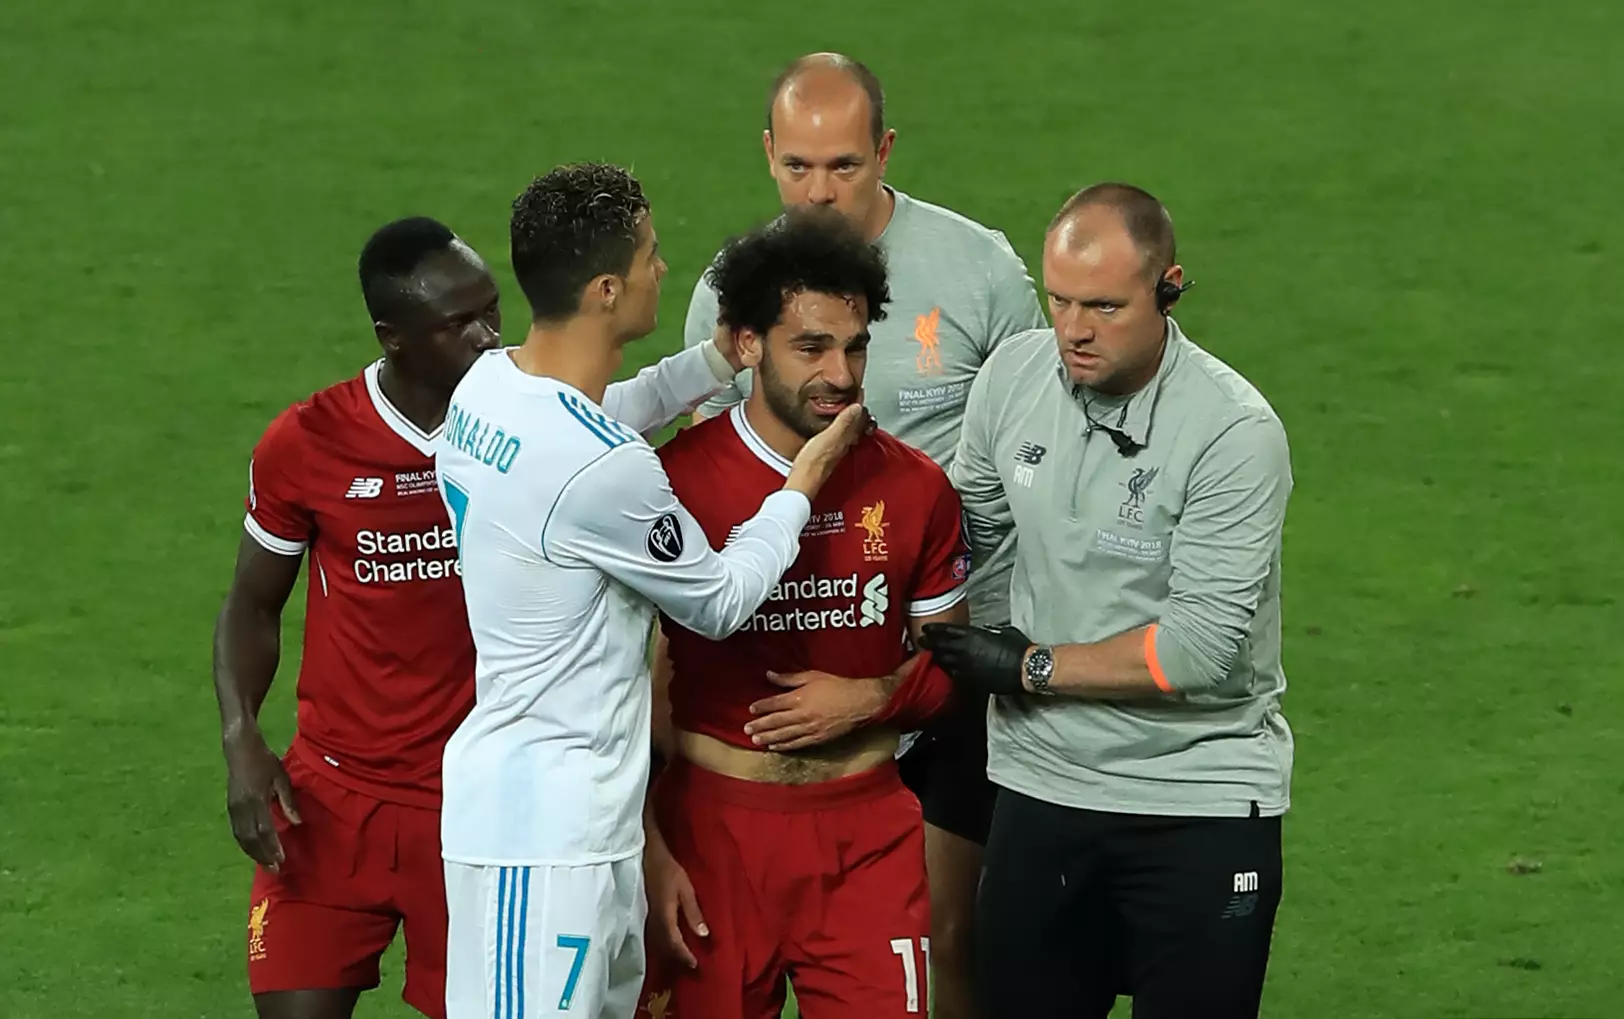 Mo Salah left the 2018 Champions League final in tears as Liverpool lost another European final